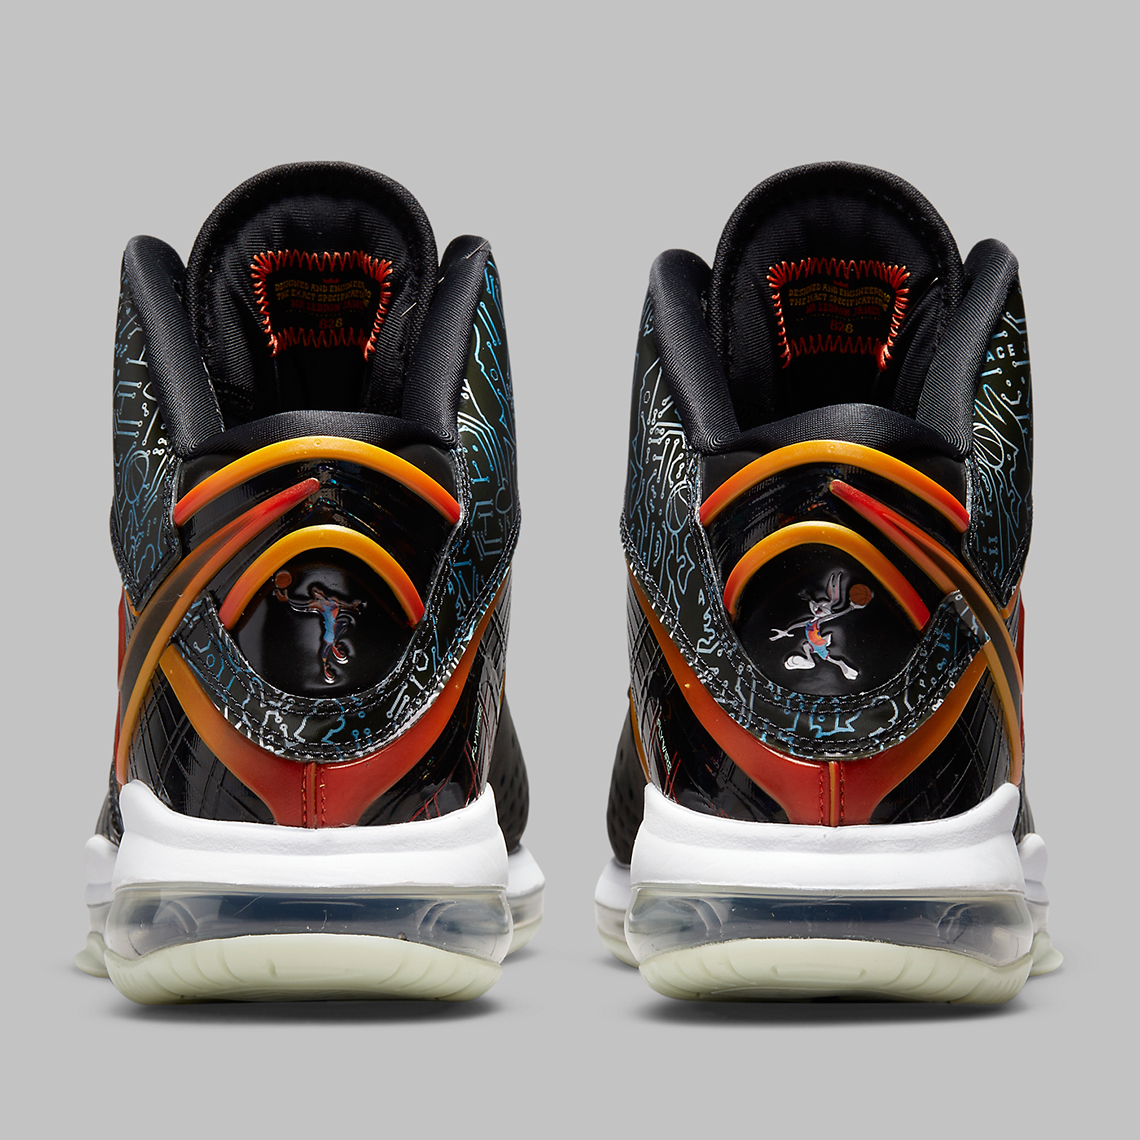 The release of the “HWC” Nike LeBron 8 has been delayed. Who's still  copping?